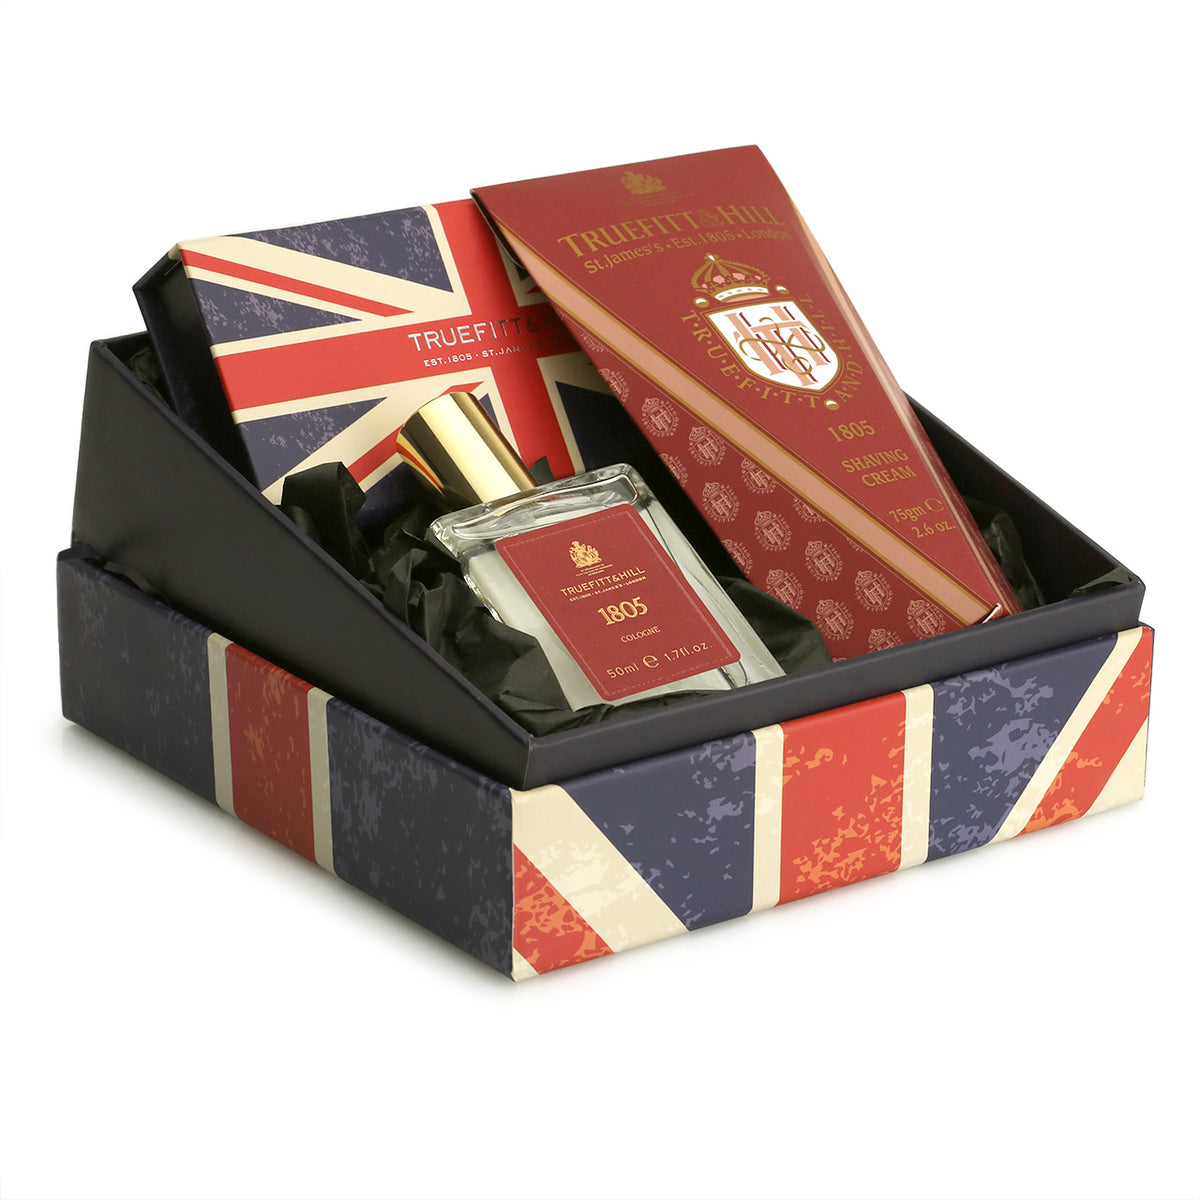 Giftbox covered in the Union-Jack containing 1805 Cologne, 1805 Shaving Cream and the Truefitt &amp; Hill Keyring